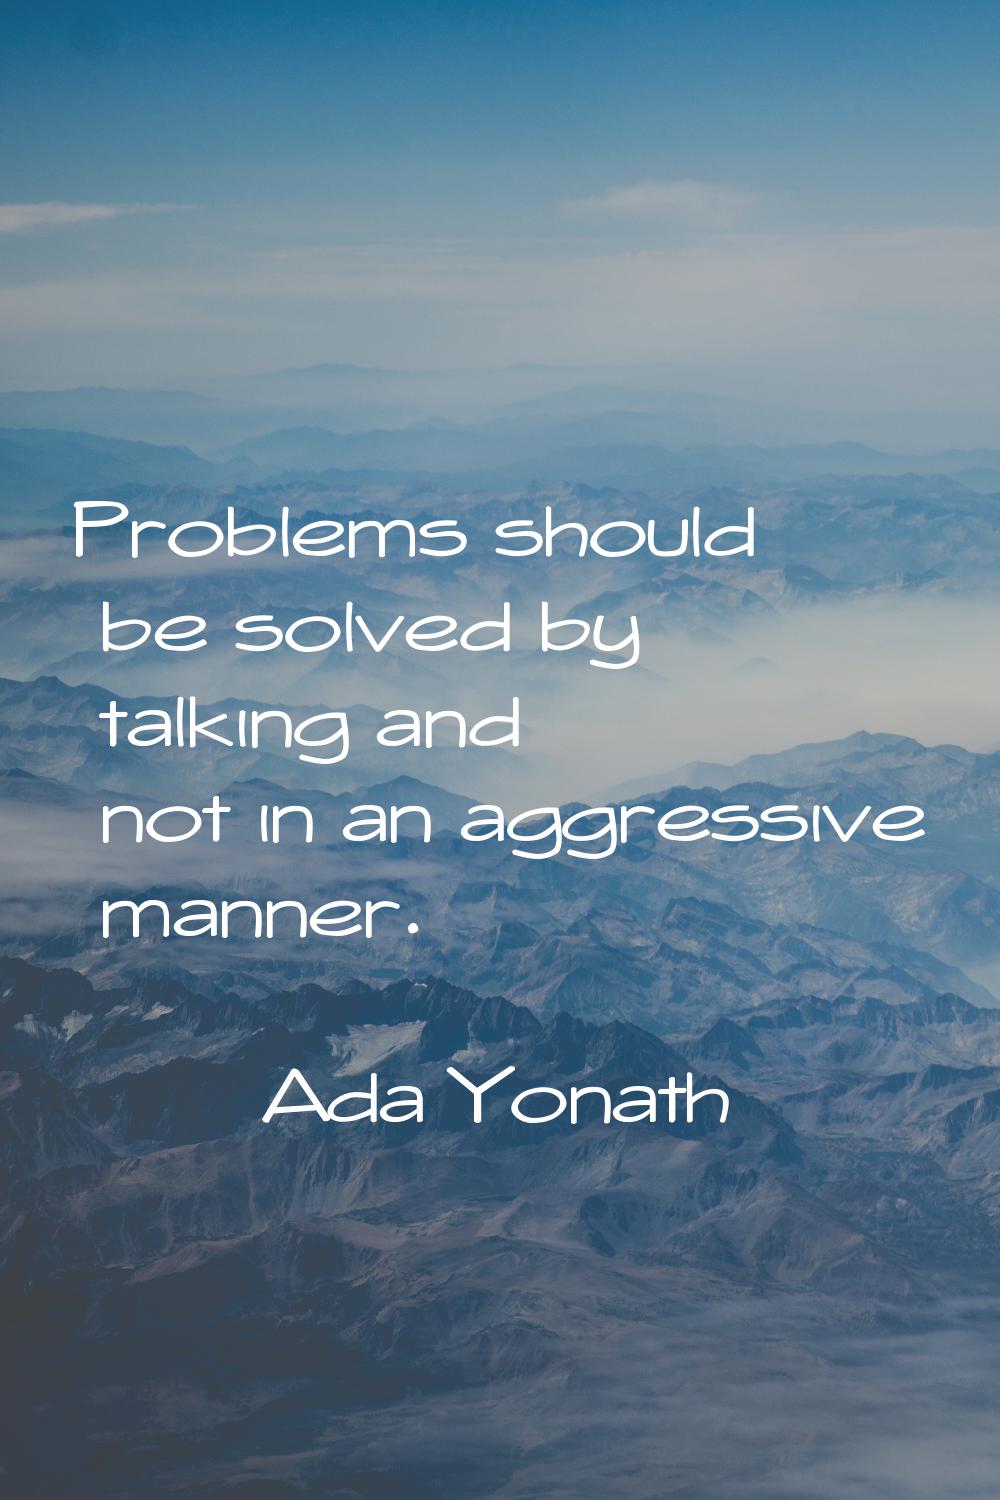 Problems should be solved by talking and not in an aggressive manner.